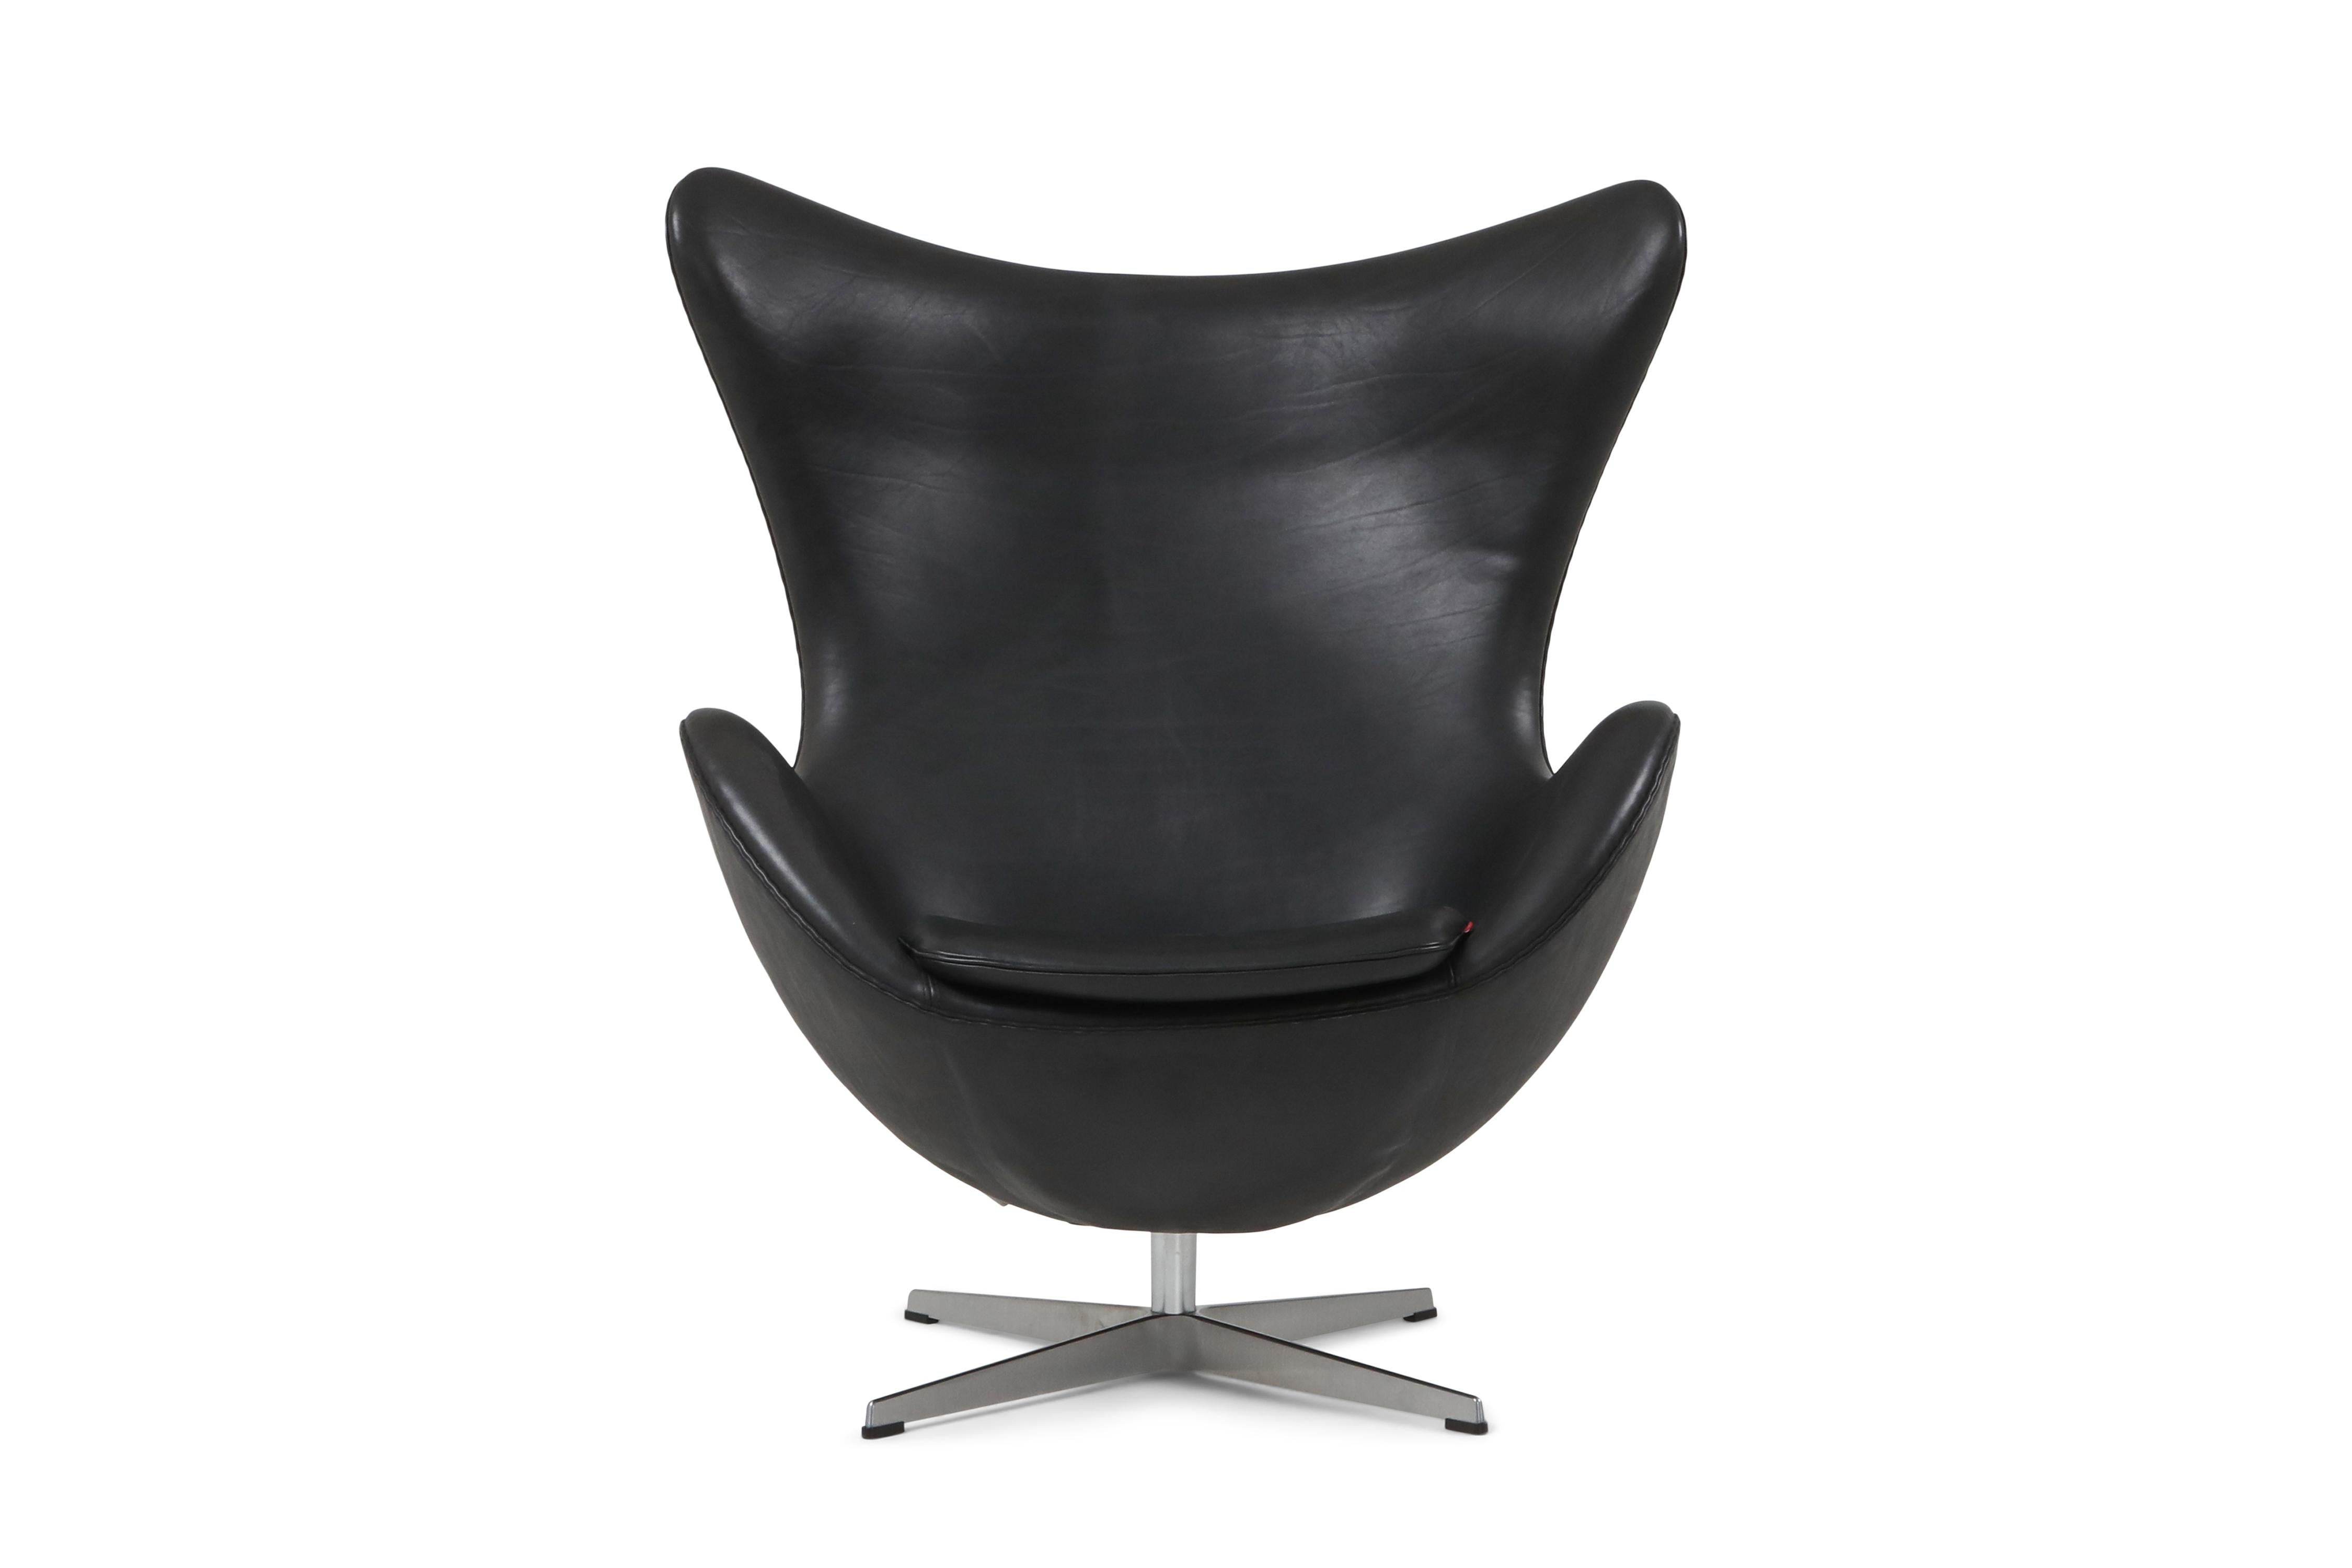 Arne Jacobsen egg chair in black aniline leather, Fritz Hansen, Denmark

The egg is one of the triumphs of Jacobsen’s total design - a sculptural contrast to the building’s almost exclusively vertical and horizontal surfaces. The egg sprang from a